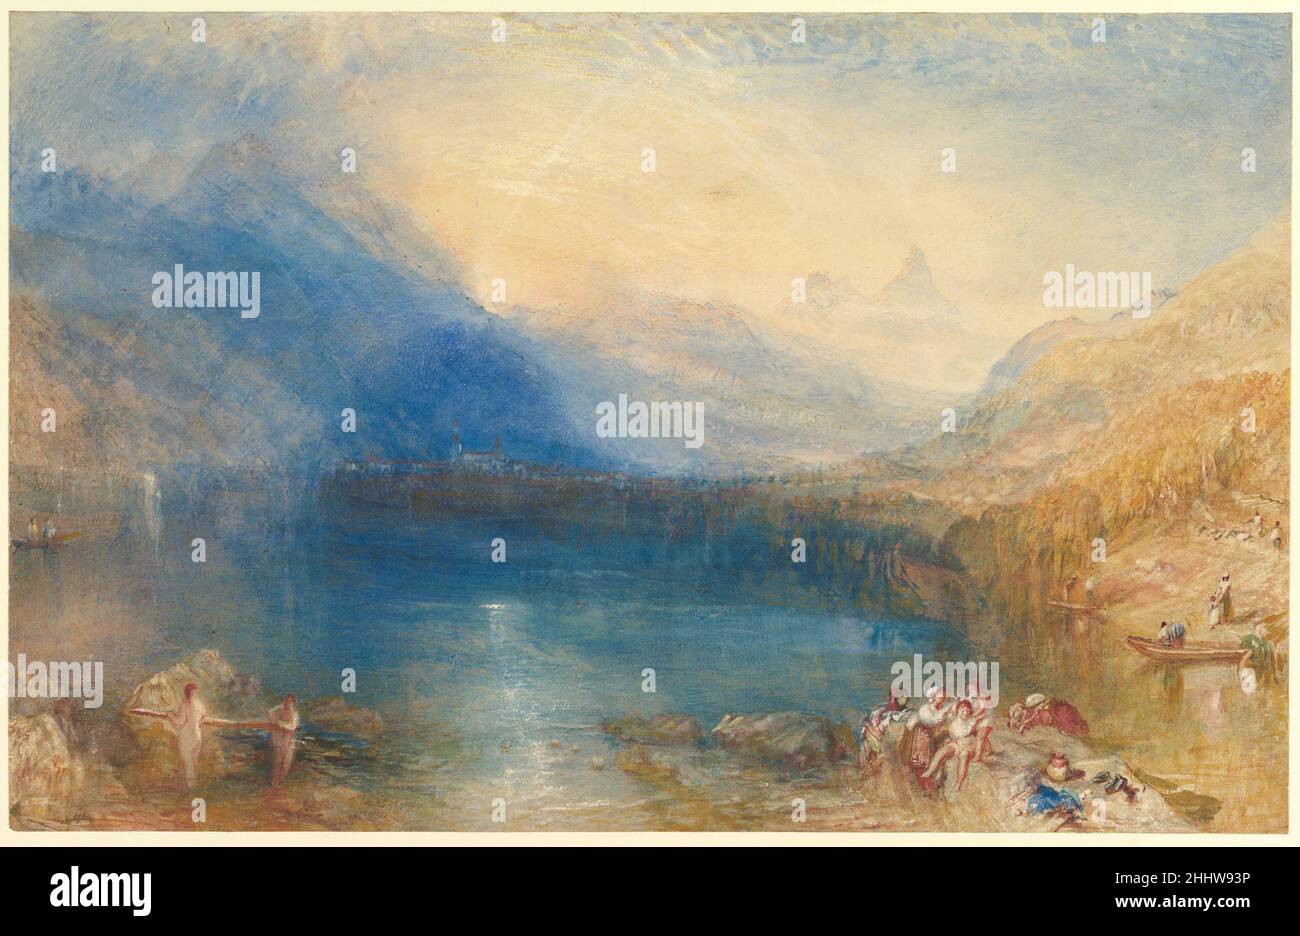 The Lake of Zug 1843 Joseph Mallord William Turner British Returning from an extended sojourn in the Swiss Alps, Turner solicited patrons for large watercolors to be based on sketches from the trip. This view was commissioned by Hugh Andrew Johnstone Munro of Novar in 1843, and was later owned by John Ruskin. Its accomplished rendering of light and atmospheric effects is characteristic of Turner's finest work. The drawing exhibits the technical prowess that made Turner both controversial and celebrated. The lake and mountains display successive applications of color—in dilute washes, drier wat Stock Photo